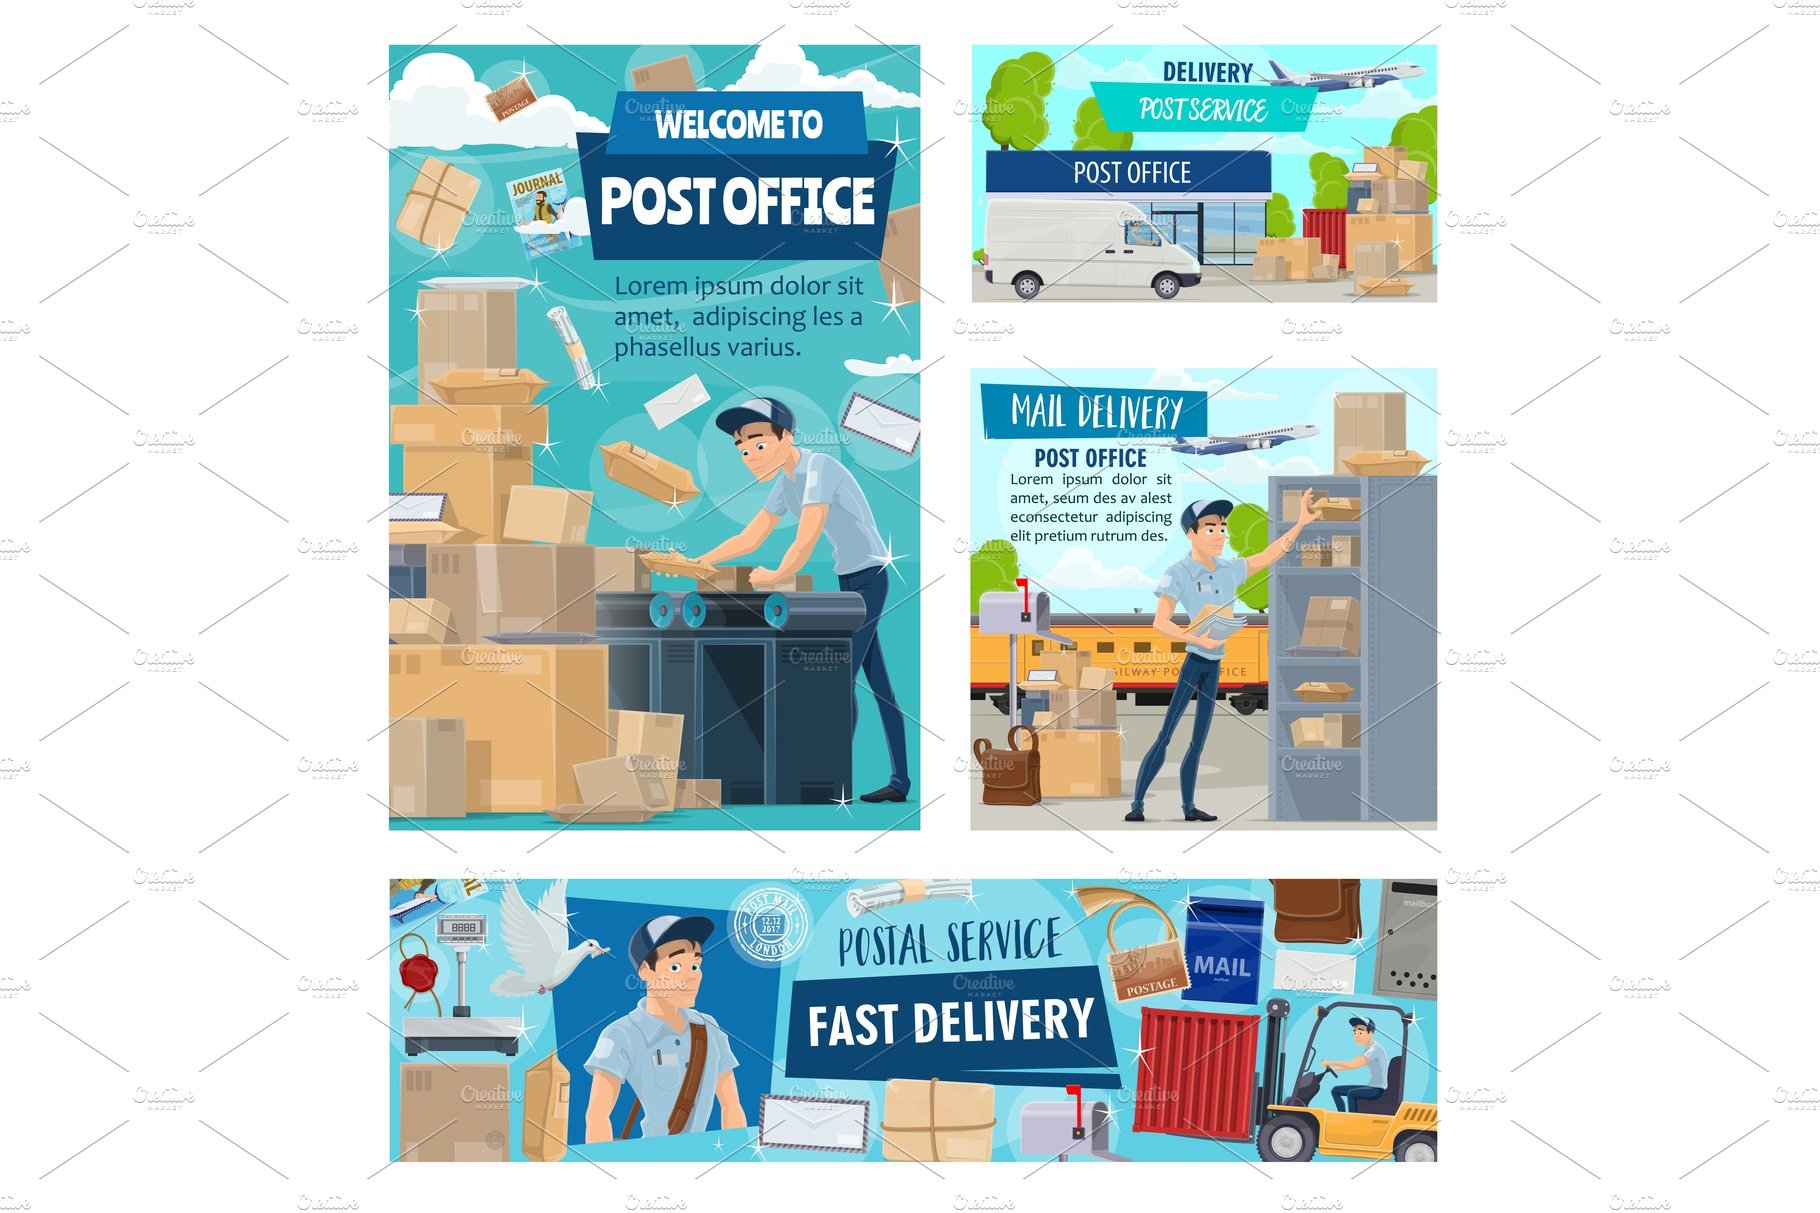 Post office worker, mail delivery cover image.